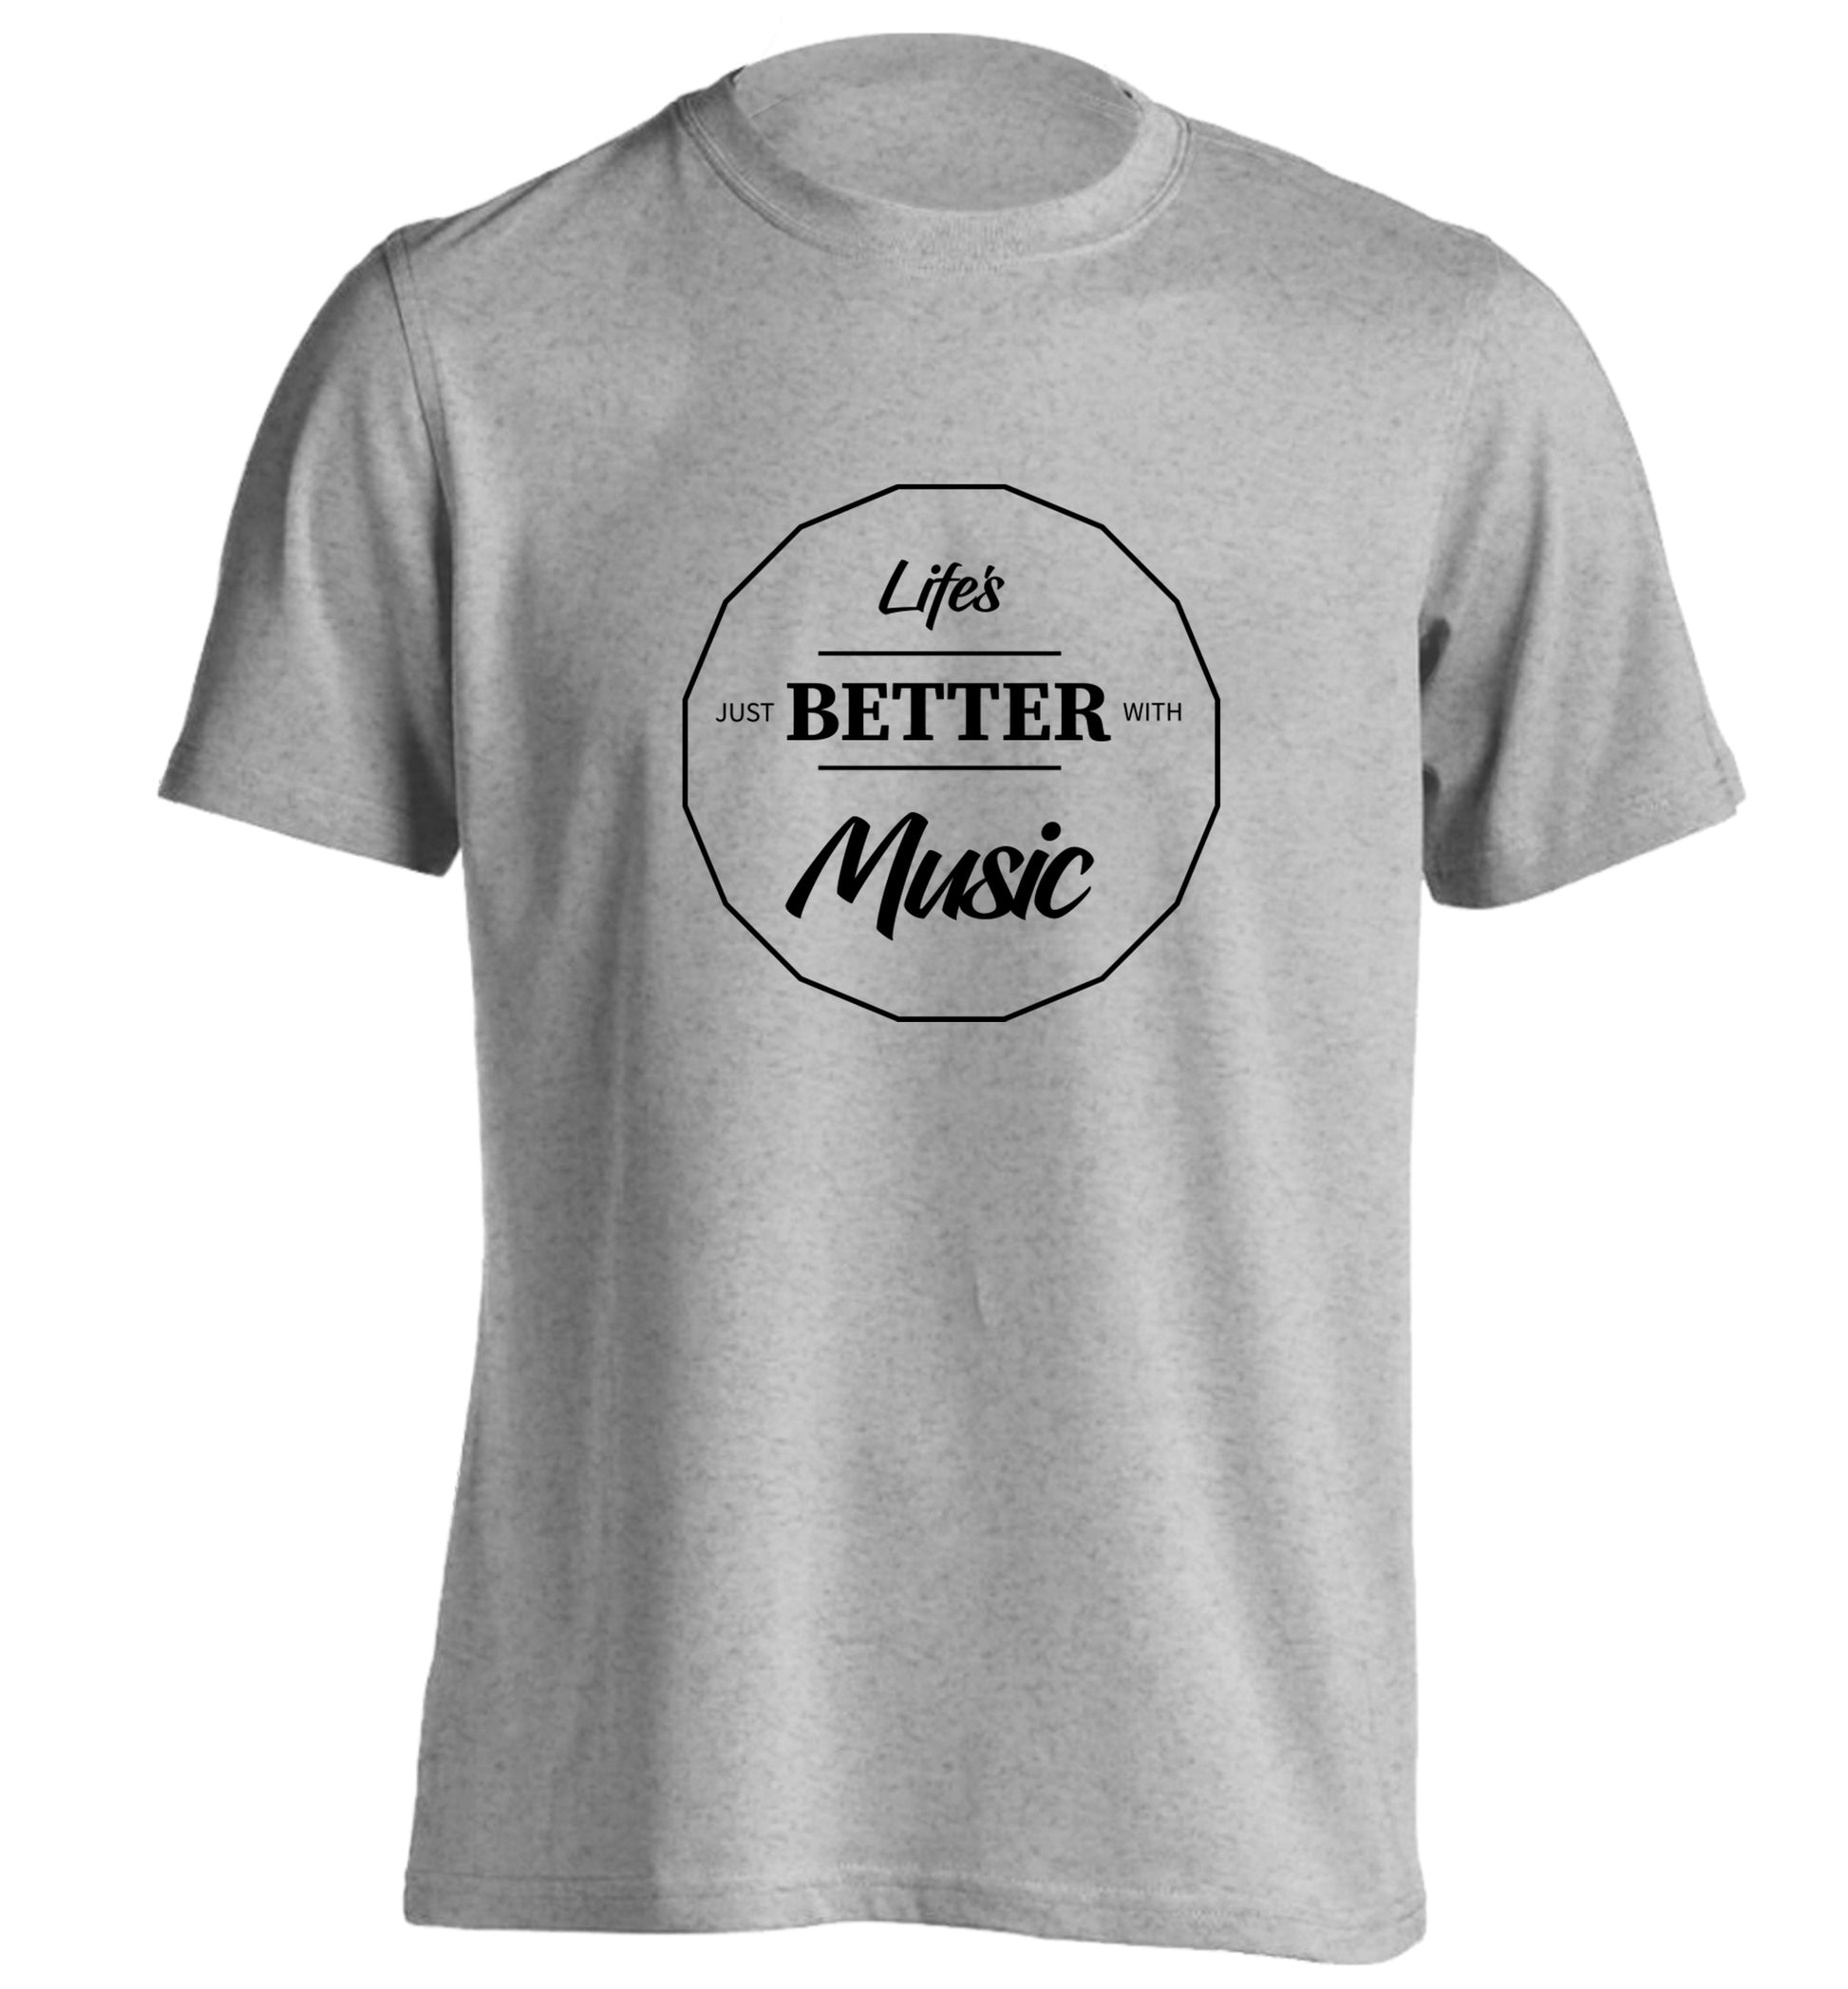 Life is Better With Music adults unisex grey Tshirt 2XL